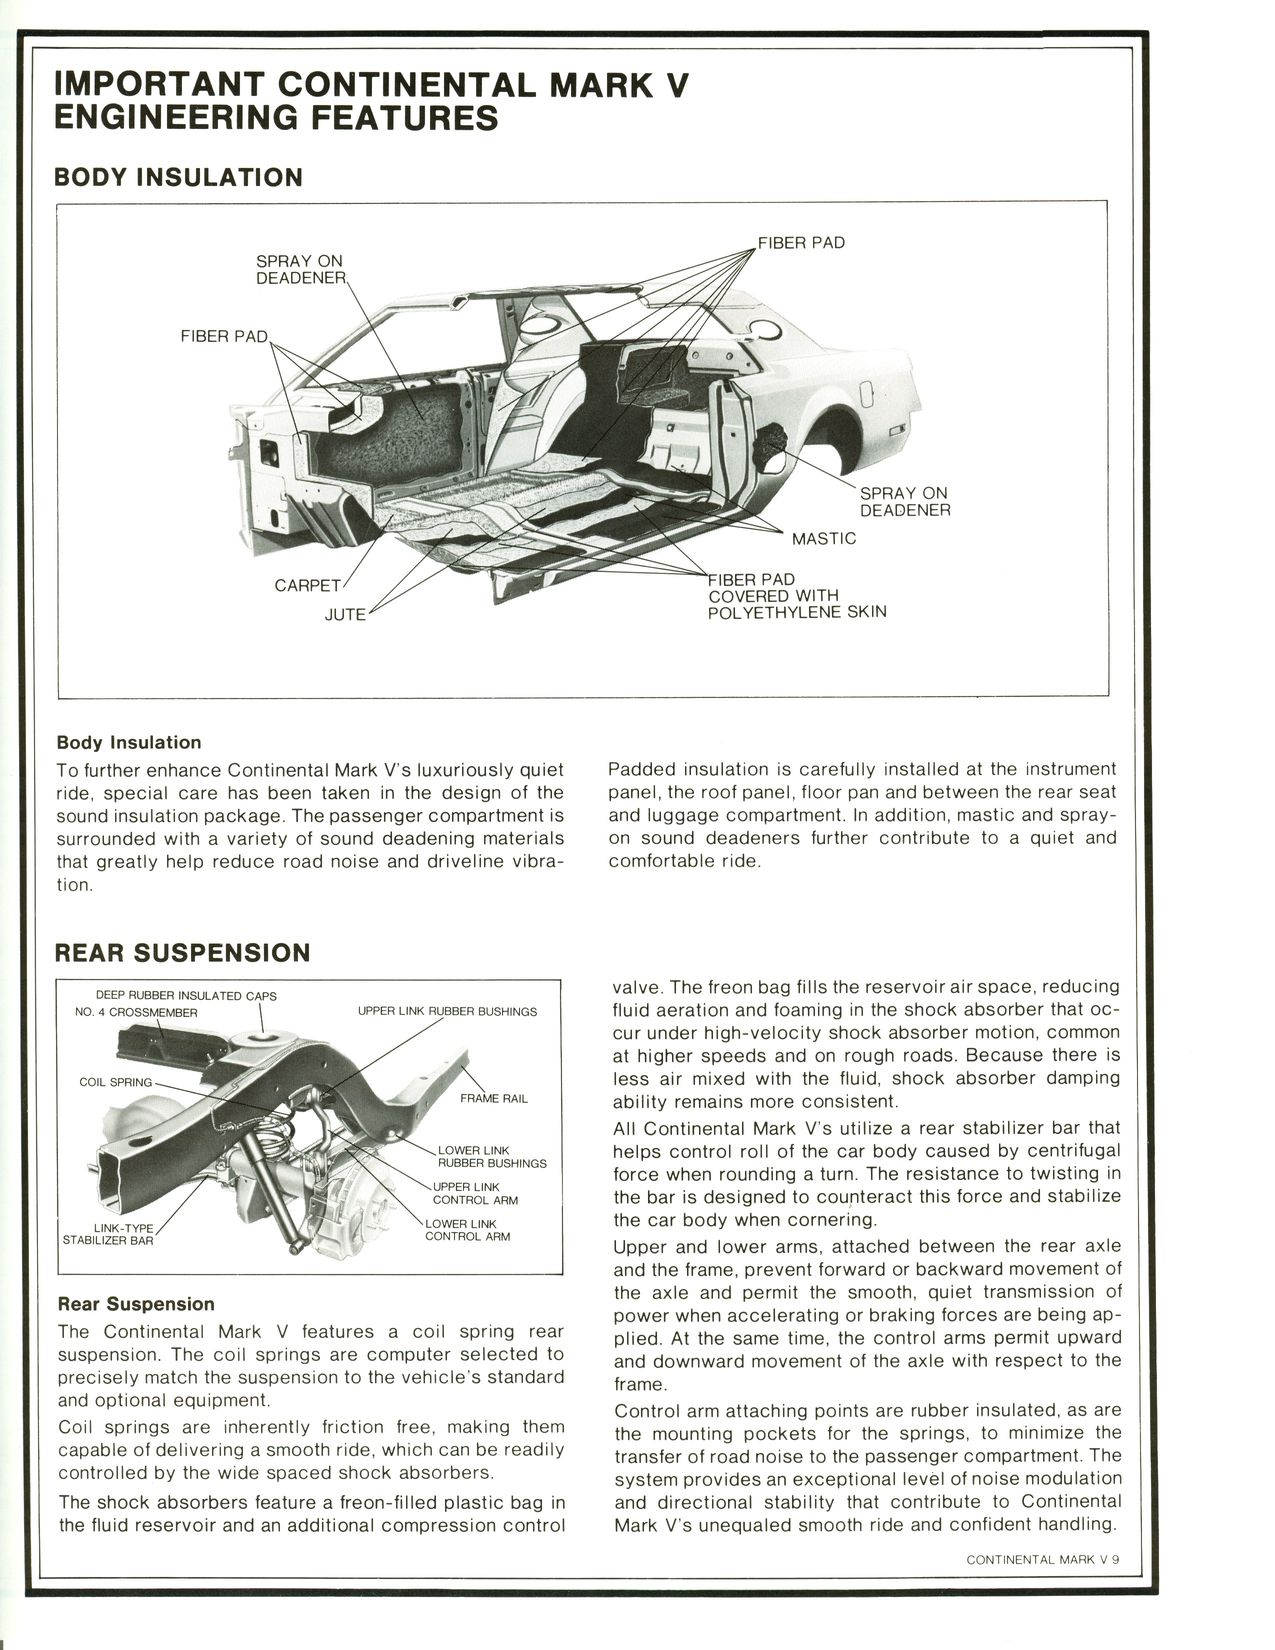 1977 Continental Product Facts Book-1-09